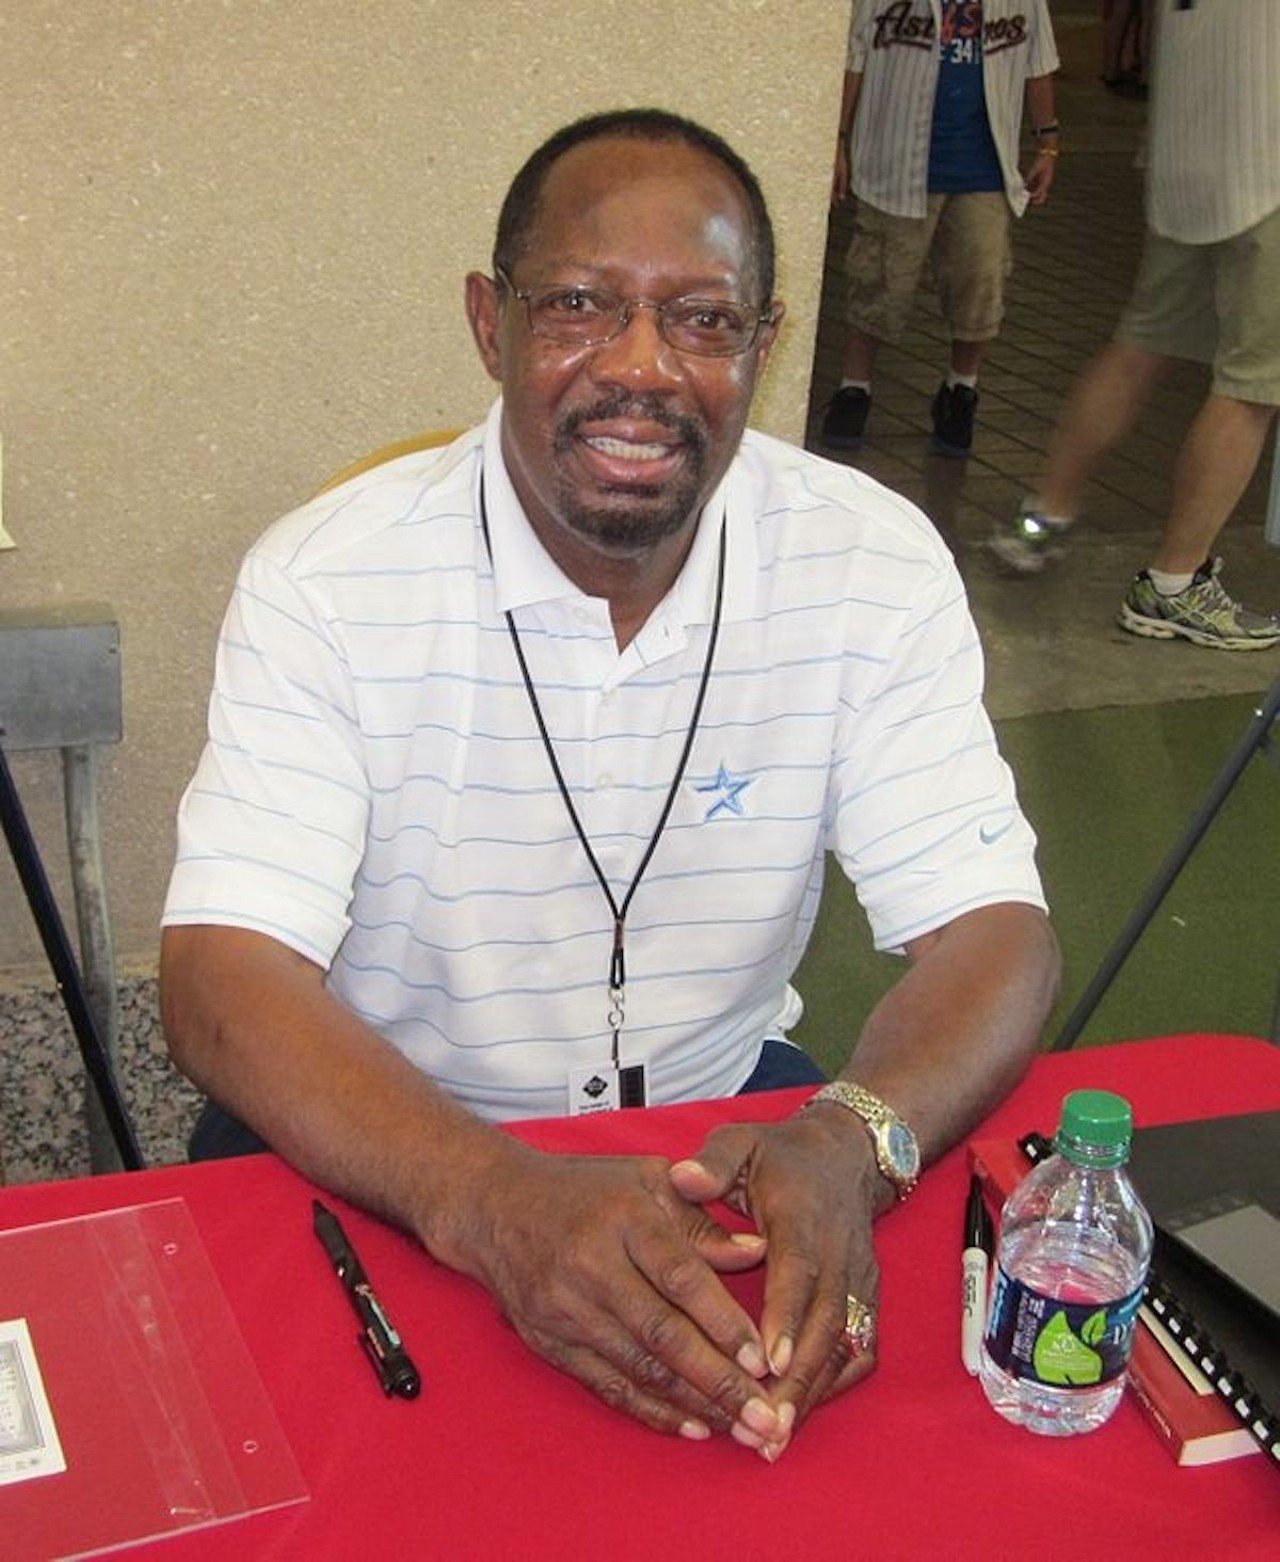 Taft High School: Jimmy Wynn
Former Major League Baseball outfielder Jimmy Wynn was born in Hamilton, Ohio, in 1942 and graduated from Taft High School. Wynn started his career being signed as an amateur free agent with the Reds in 1962, spending that season playing with the Tampa Tarpons in the Florida State League, mostly as a third baseman. He made his Major League debut in 1963 with the Houston Colt .45s (now the Astros) and later went on to play for the Los Angeles Dodgers, the Atlanta Braves, the New York Yankees and Milwaukee Brewers, playing a total of 15 seasons. During his career, Wynn had over 8,000 plate appearances and compiled a .250 batting average, including 291 home runs. In 2005, the Astros retired his number, 24. Wynn passed away in March 2020.